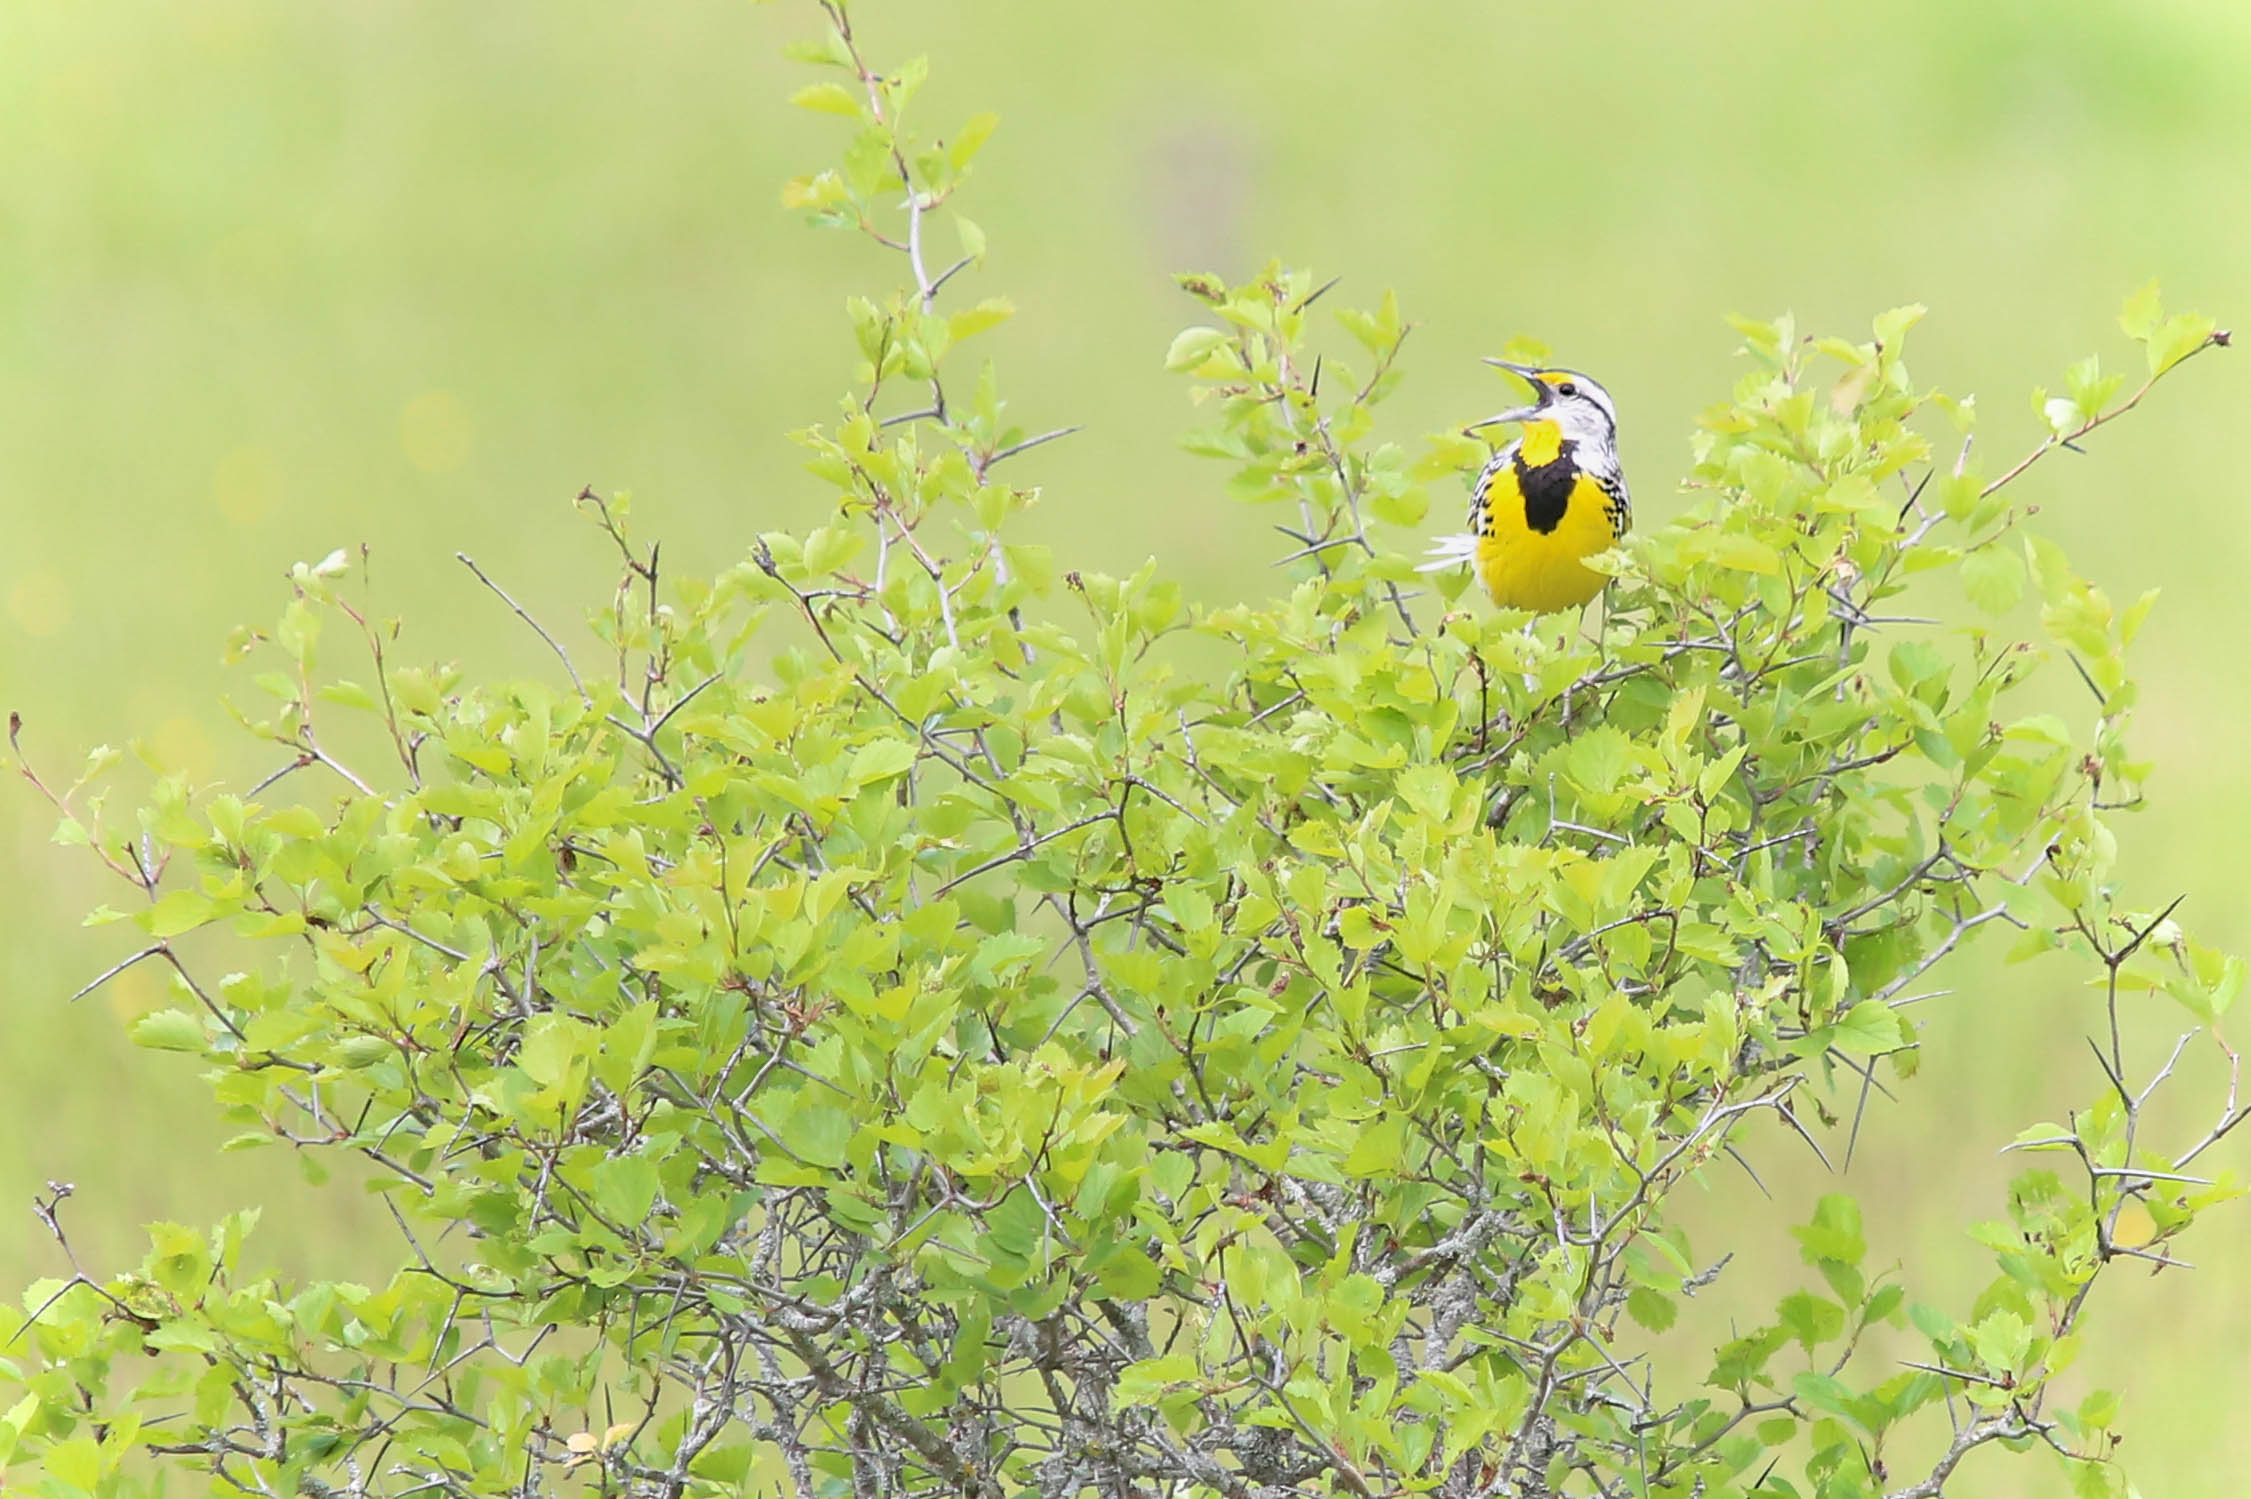 Eastern meadowlark, seen here with its mouth open sitting on a leafy tree, spend time in Rouge National Urban Park.